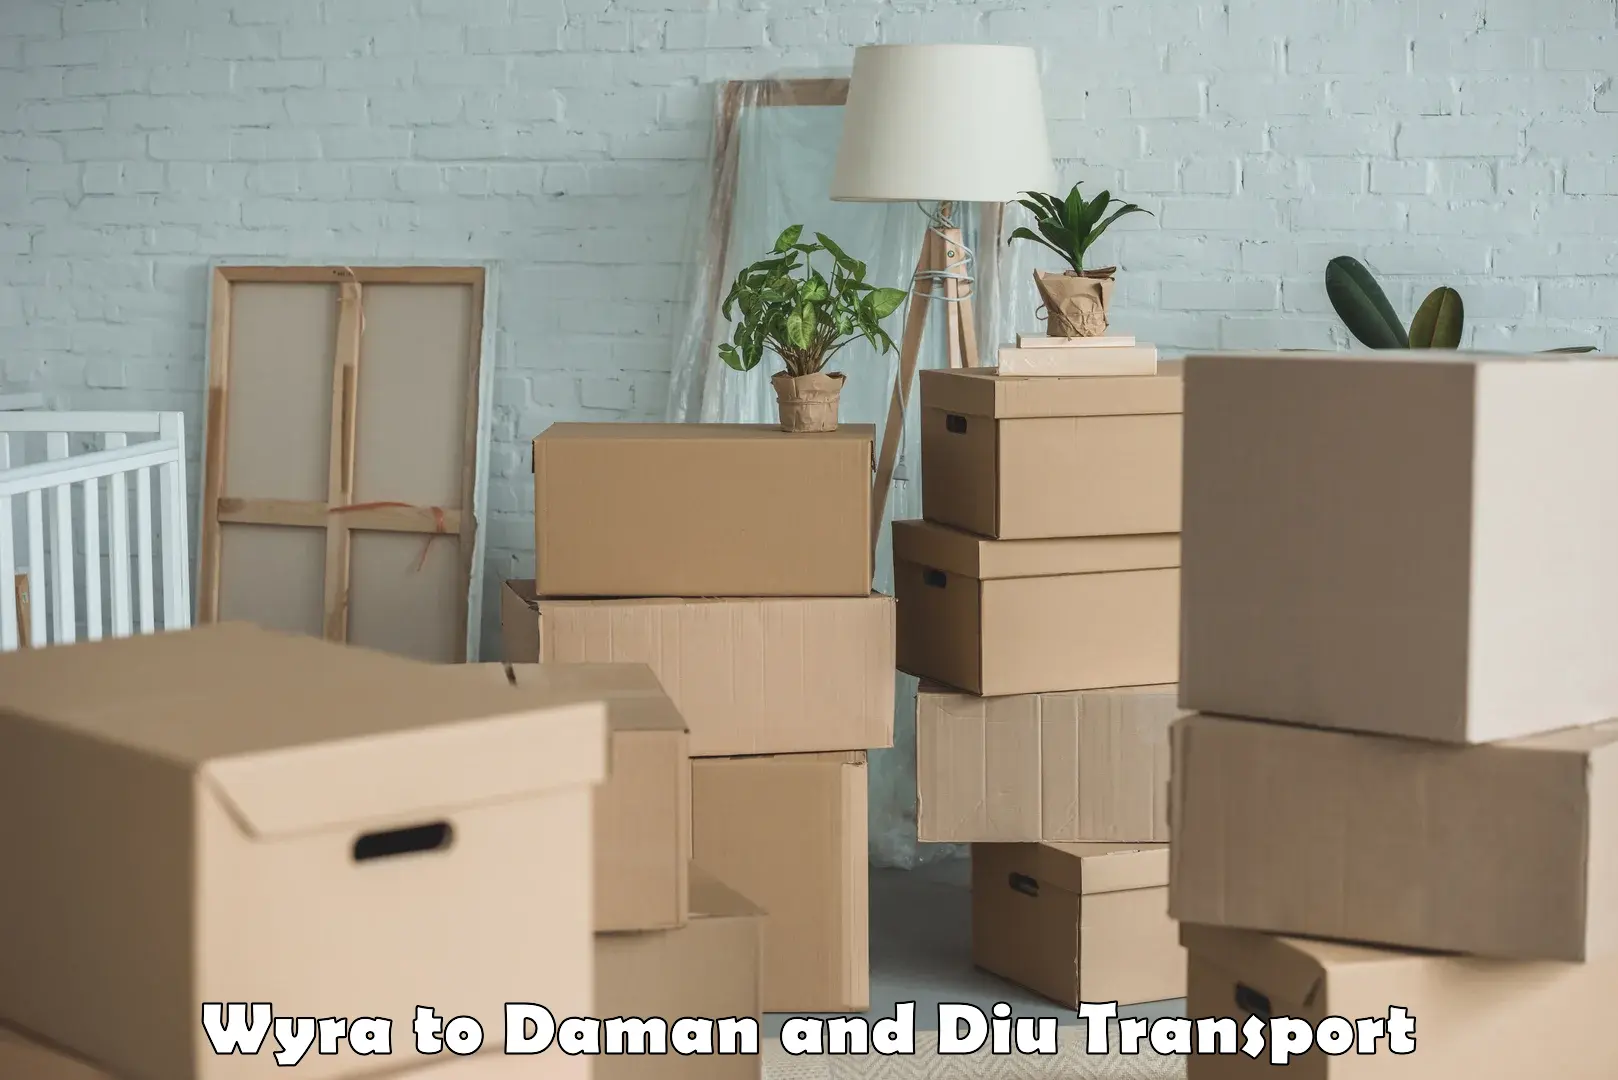 Daily parcel service transport Wyra to Daman